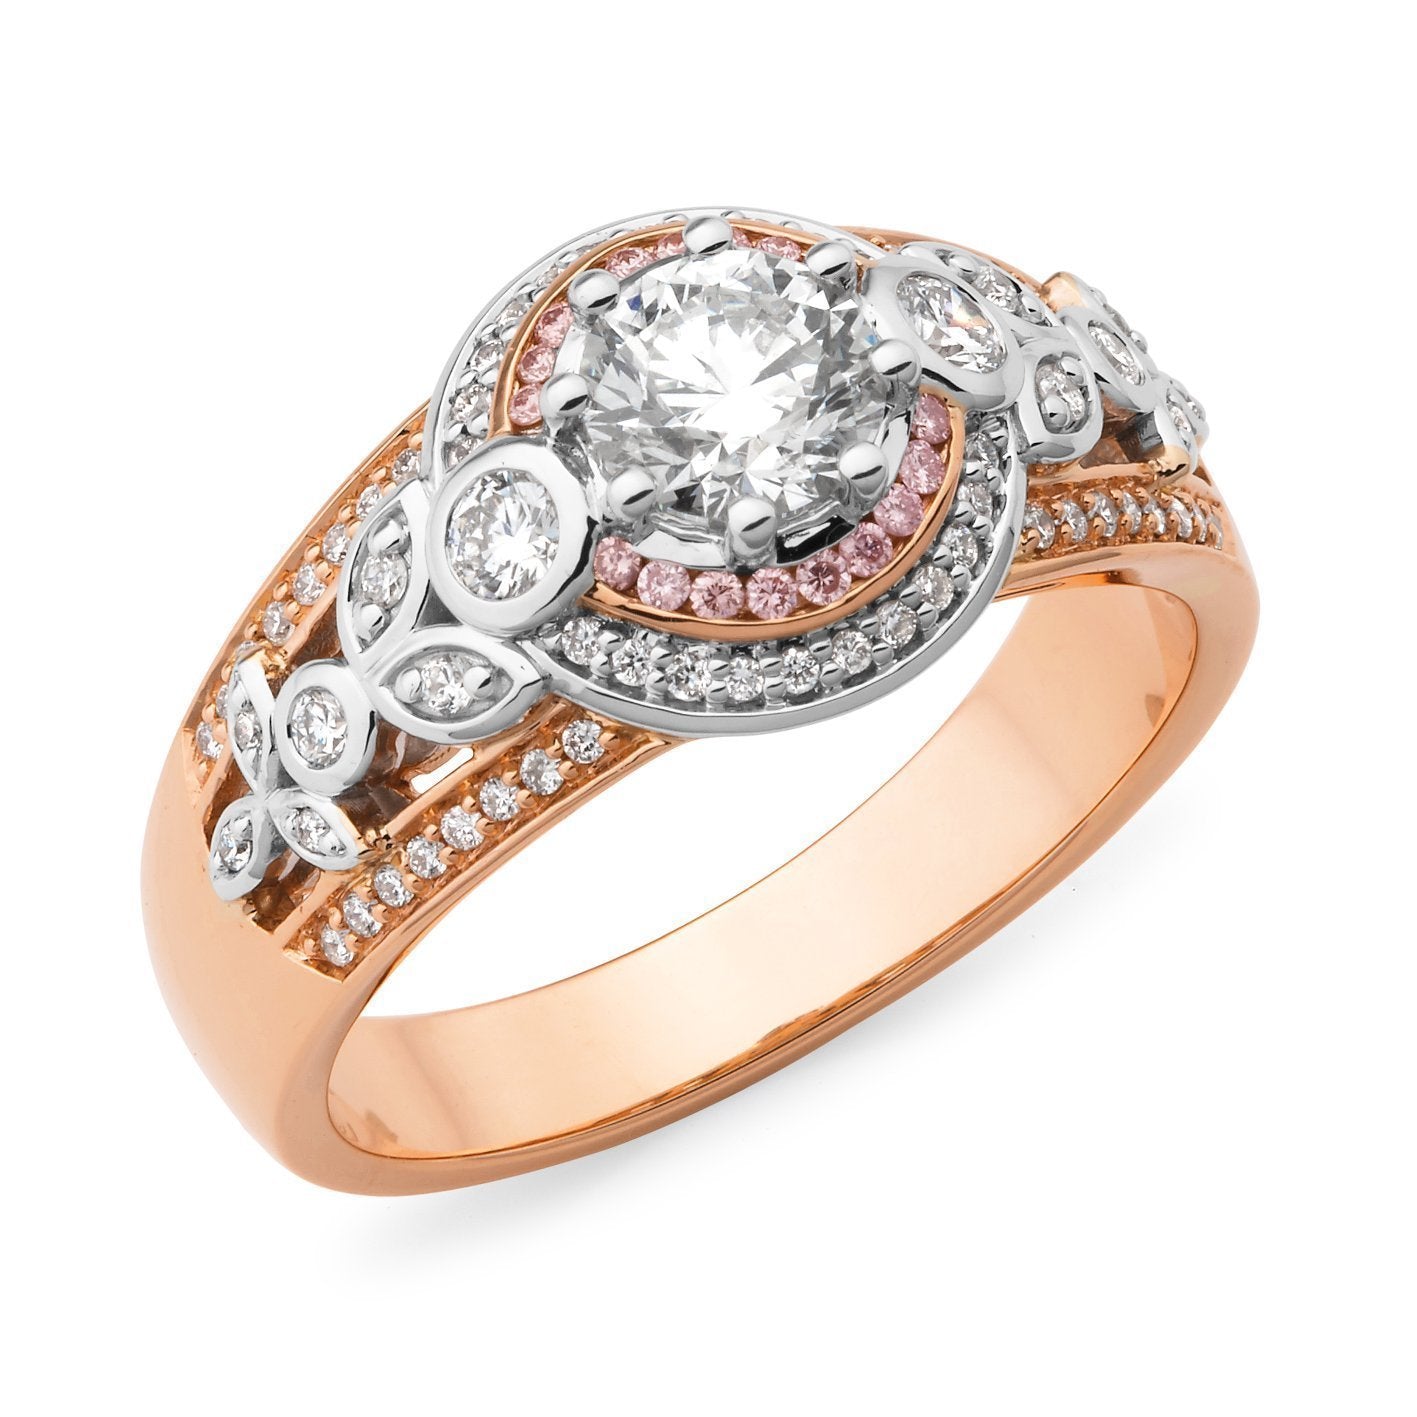 PINK CAVIAR 1.26ct White Round Brilliant & Pink Diamond Engagement Ring in 9ct Rose Gold